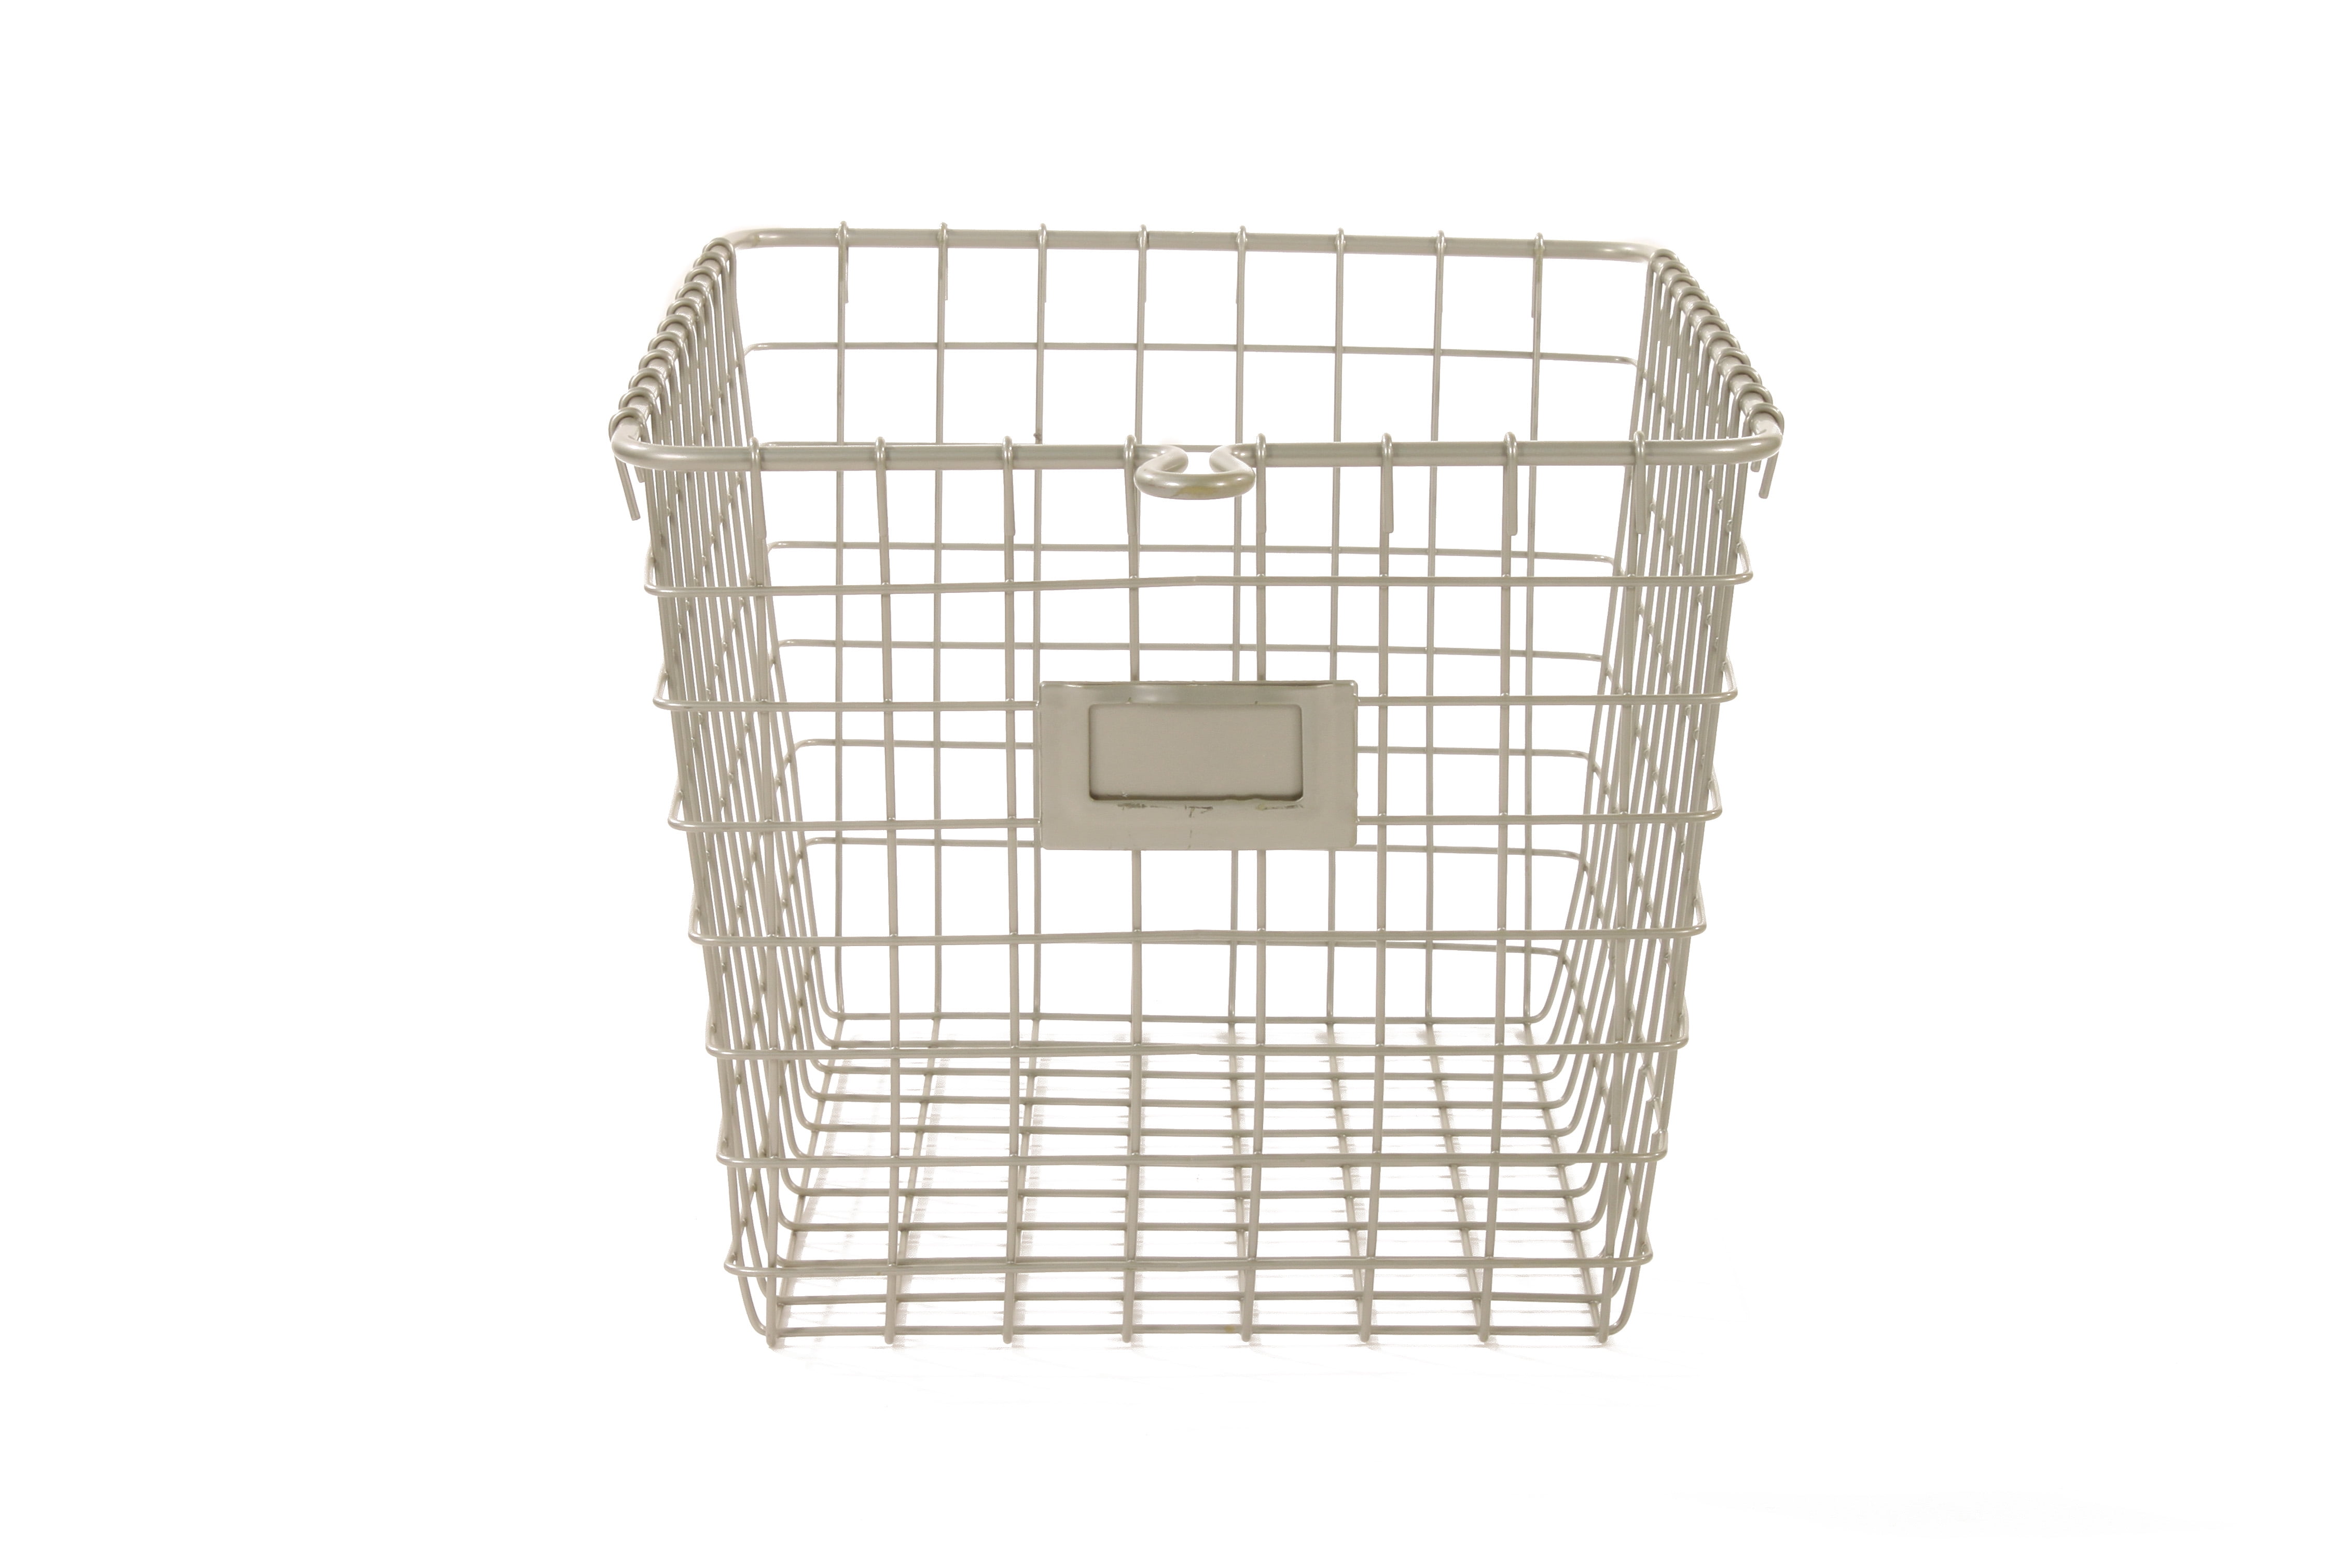 Square Metal Wire Baskets Set of 3 Organizer Holder Rustic Country Style 